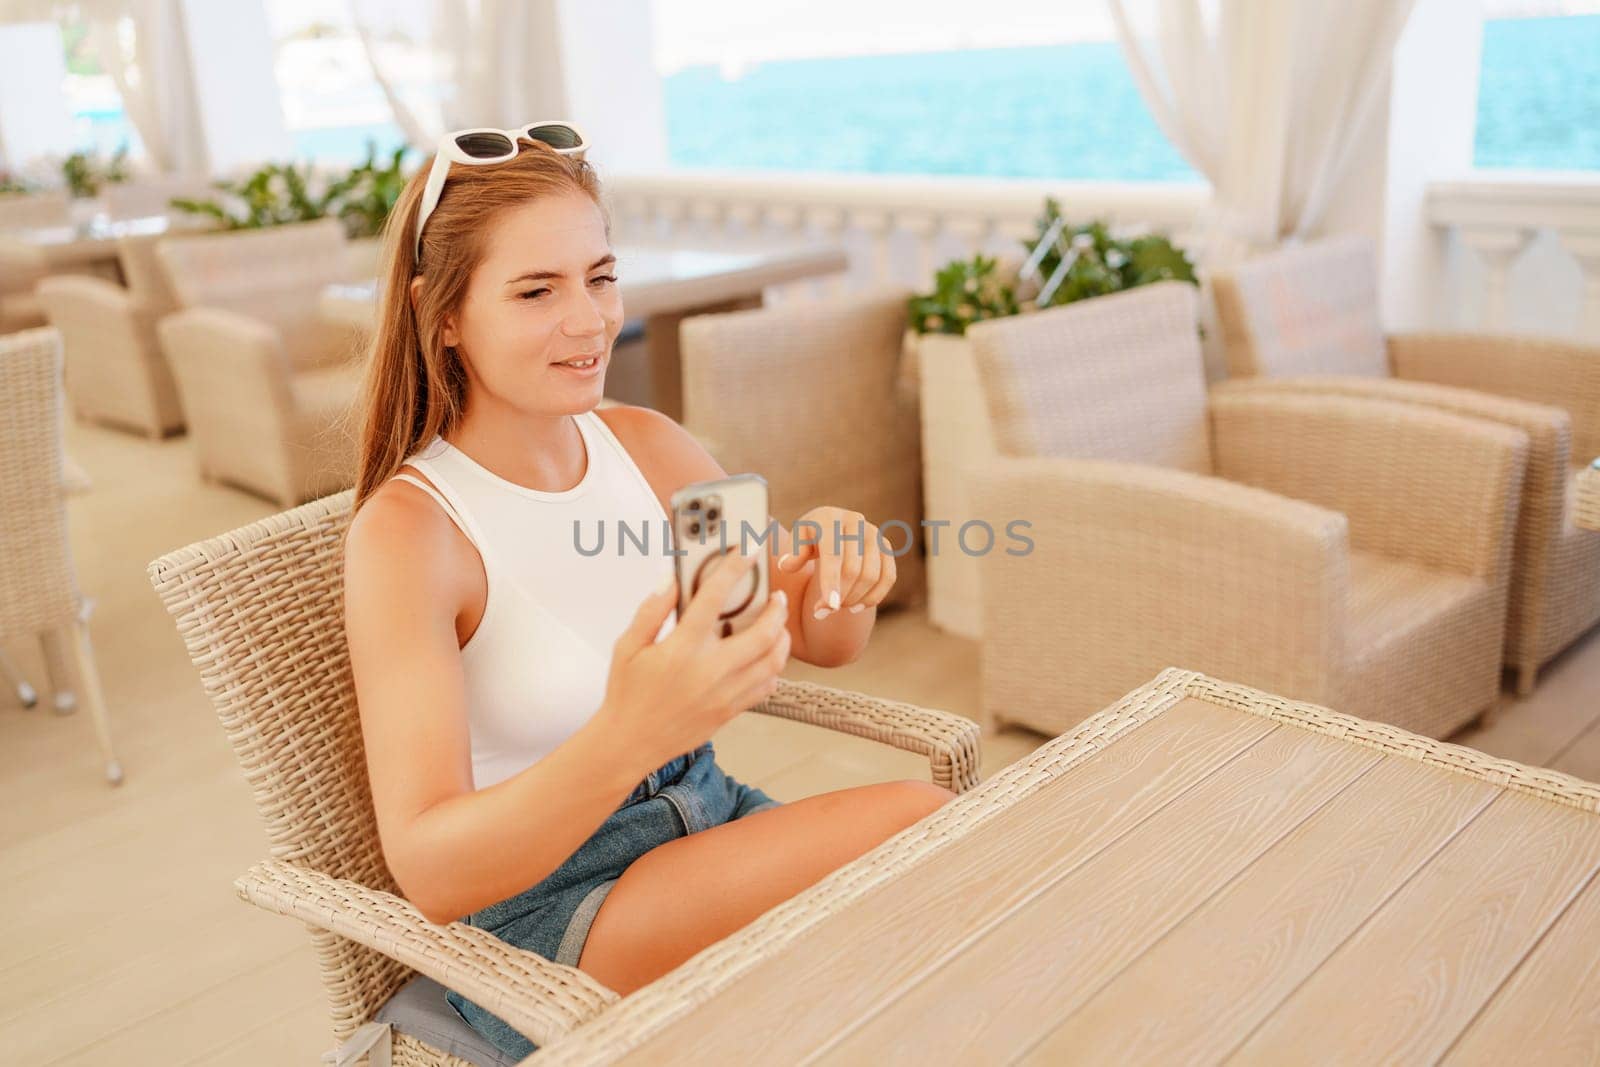 A woman is sitting at a table with a cell phone in her hand. She is taking a picture of the ocean